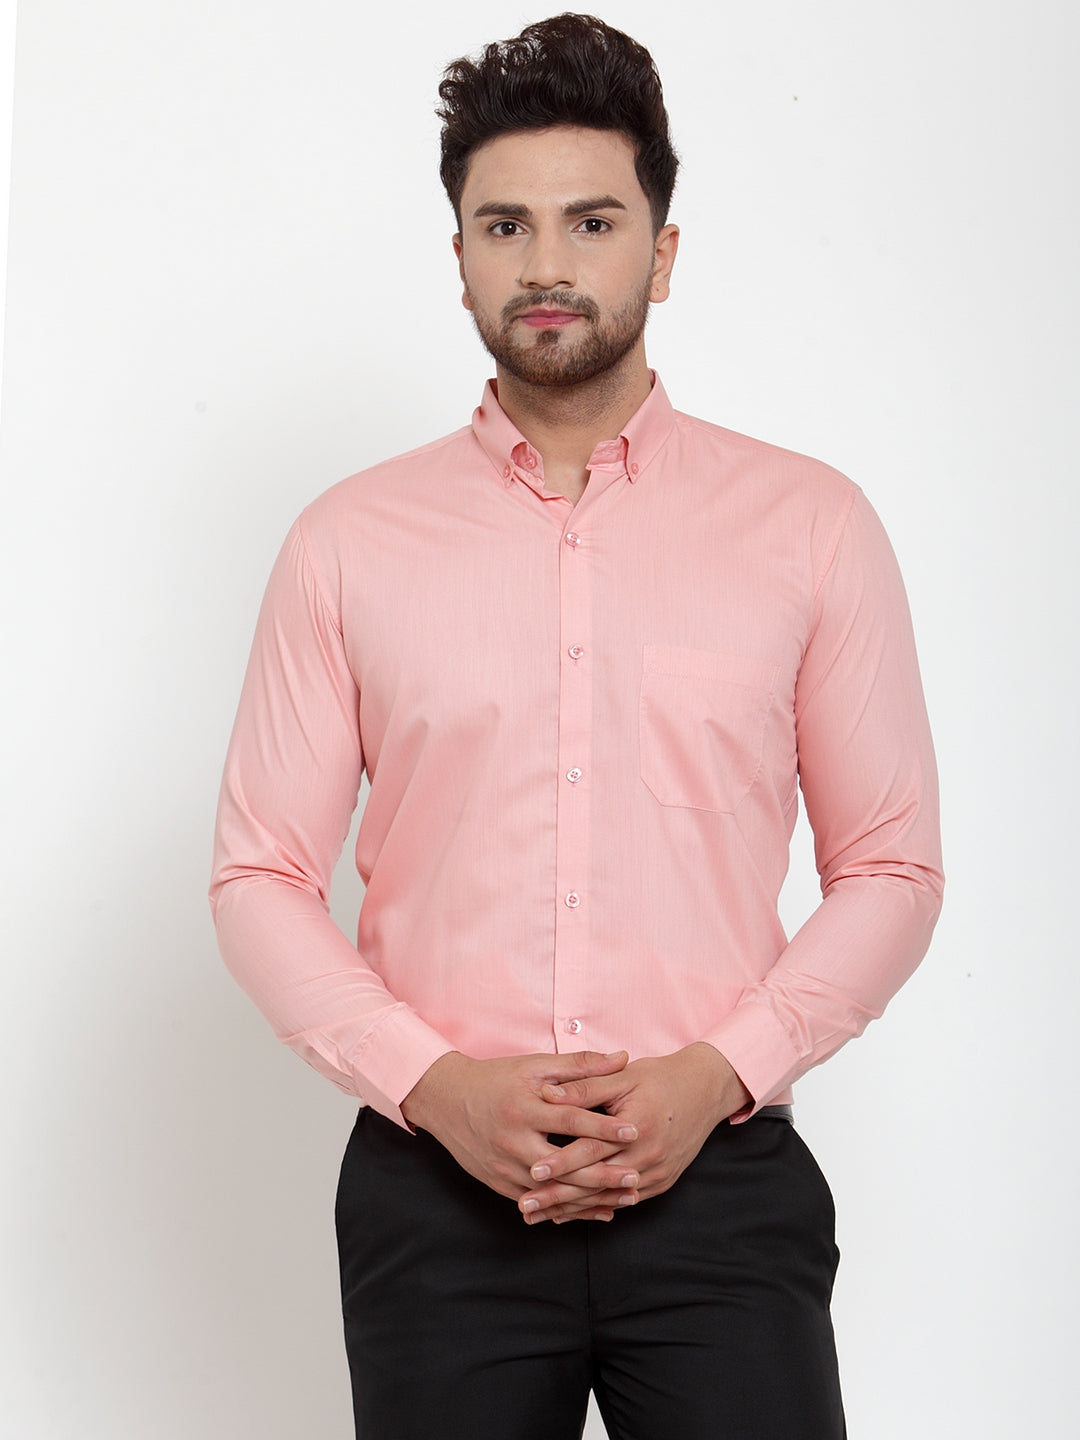 Men's Red Cotton Solid Button Down Formal Shirts ( SF 713Coral ) - Jainish